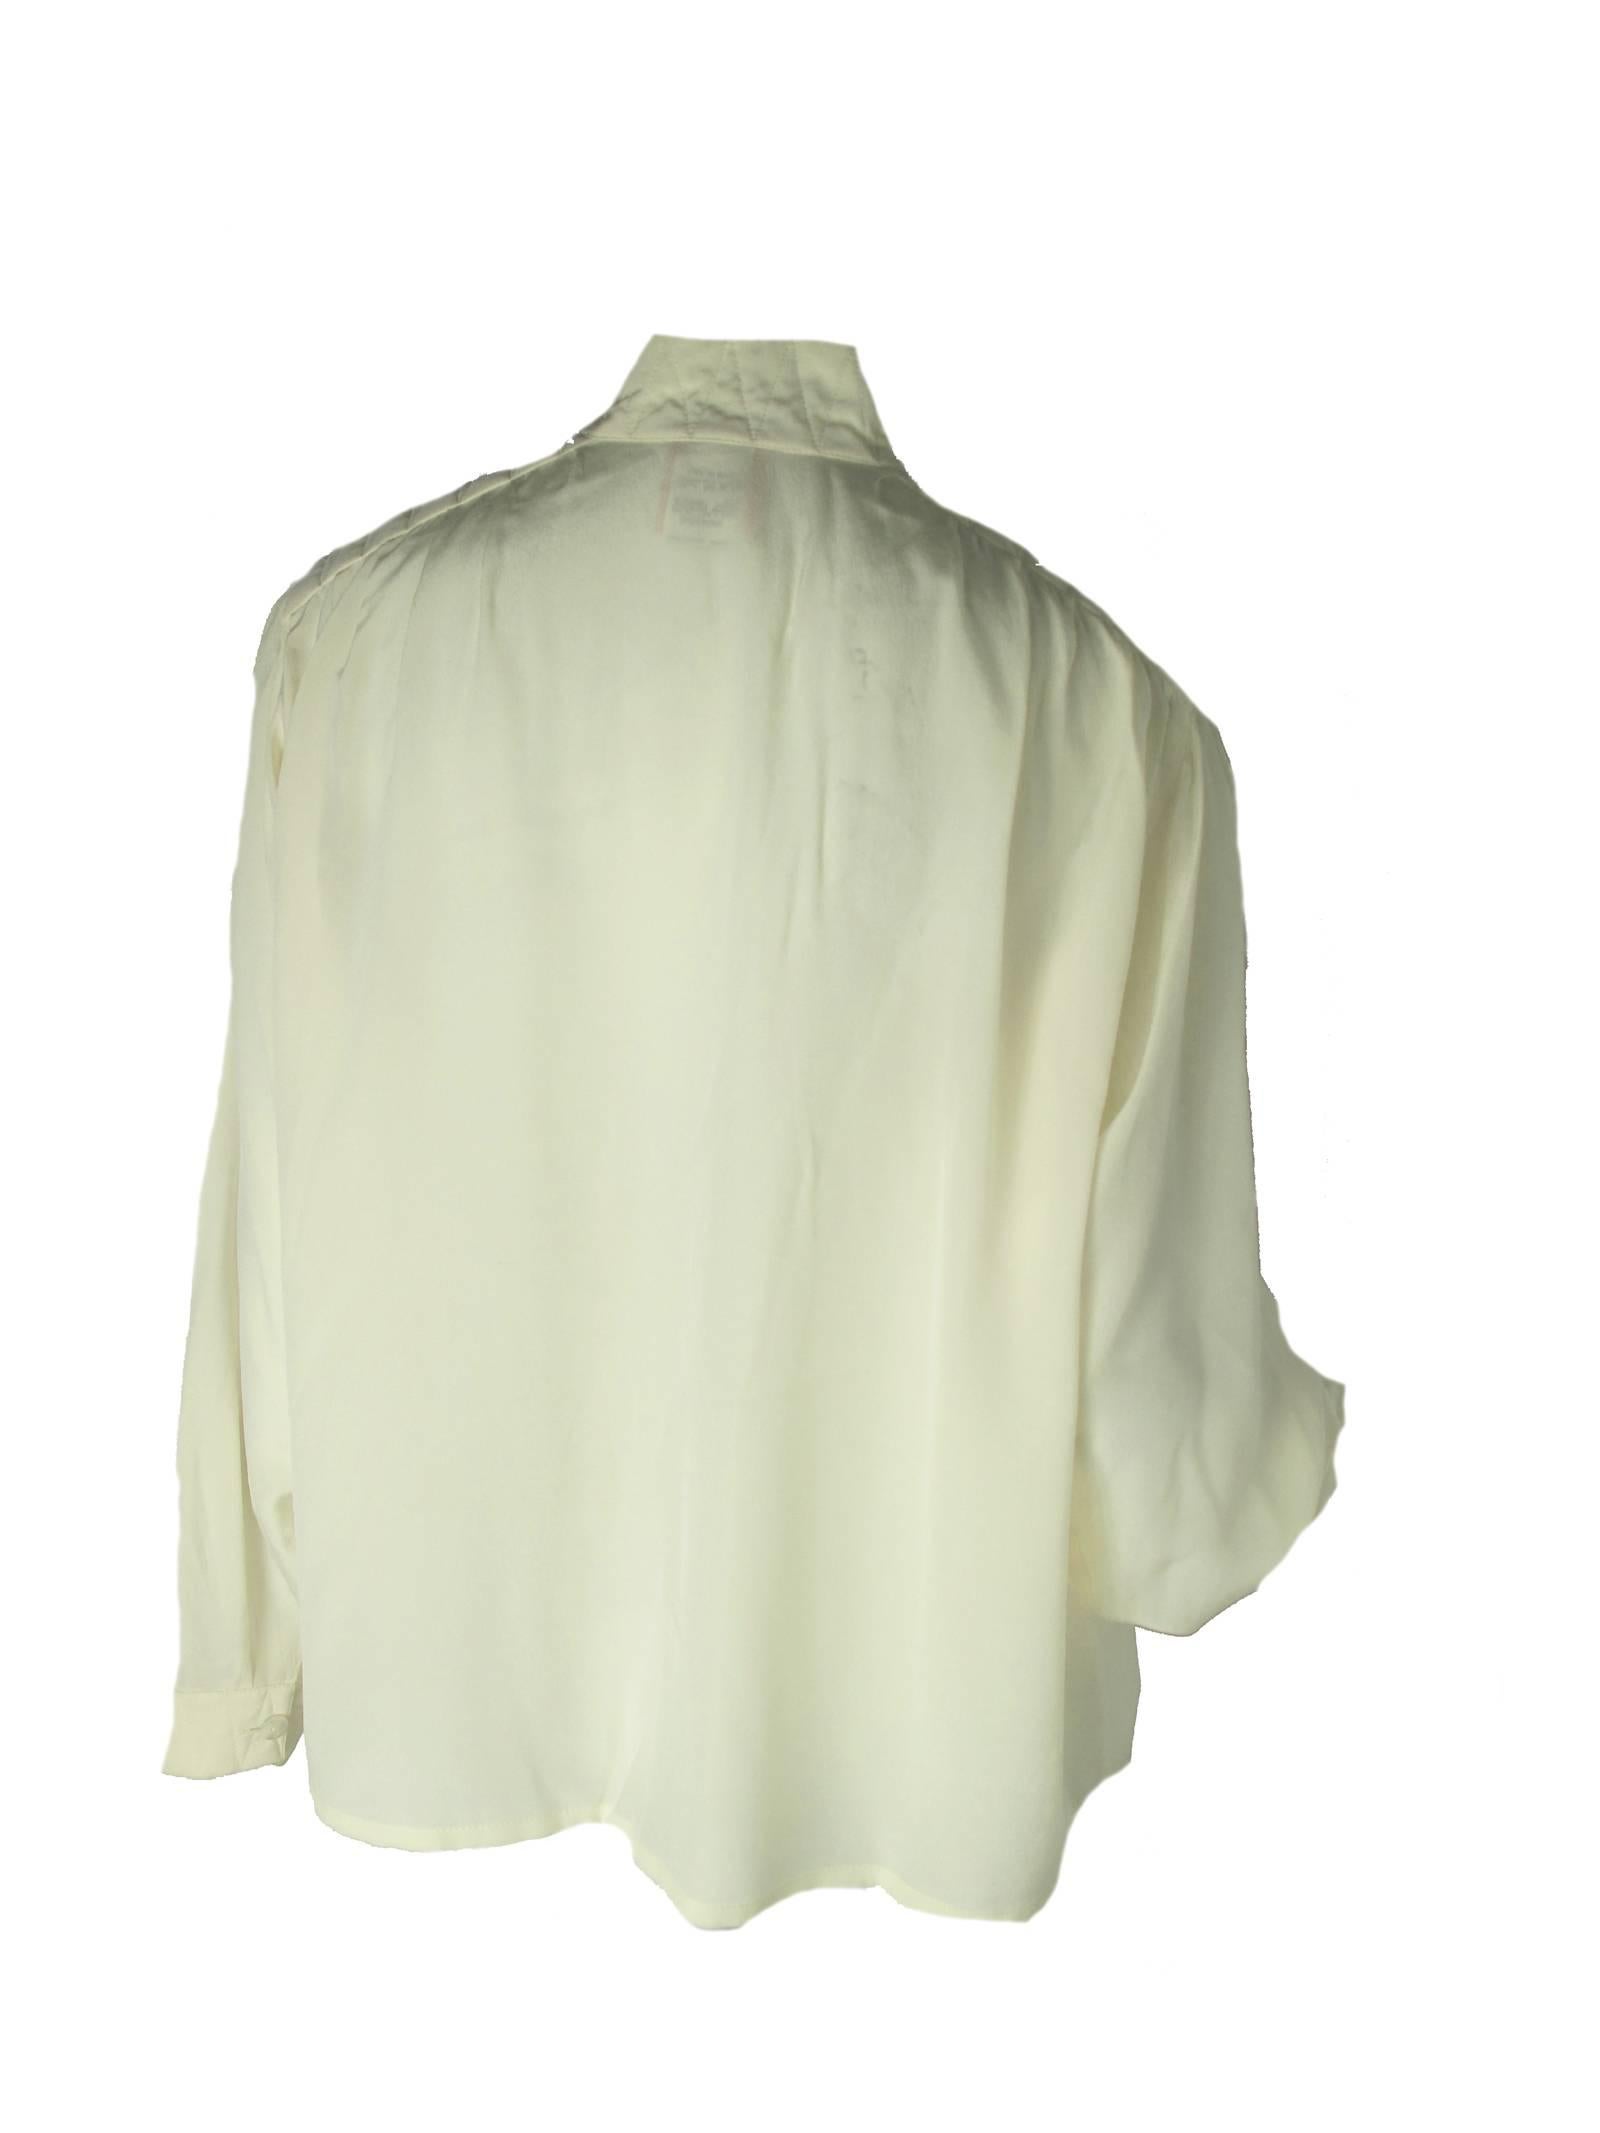 Krizia cream silk blouse with stitching details on shoulders.  Condition: Very good. 
Size Large

We accept returns for refund, please see our terms.  We offer free ground shipping within the US.
